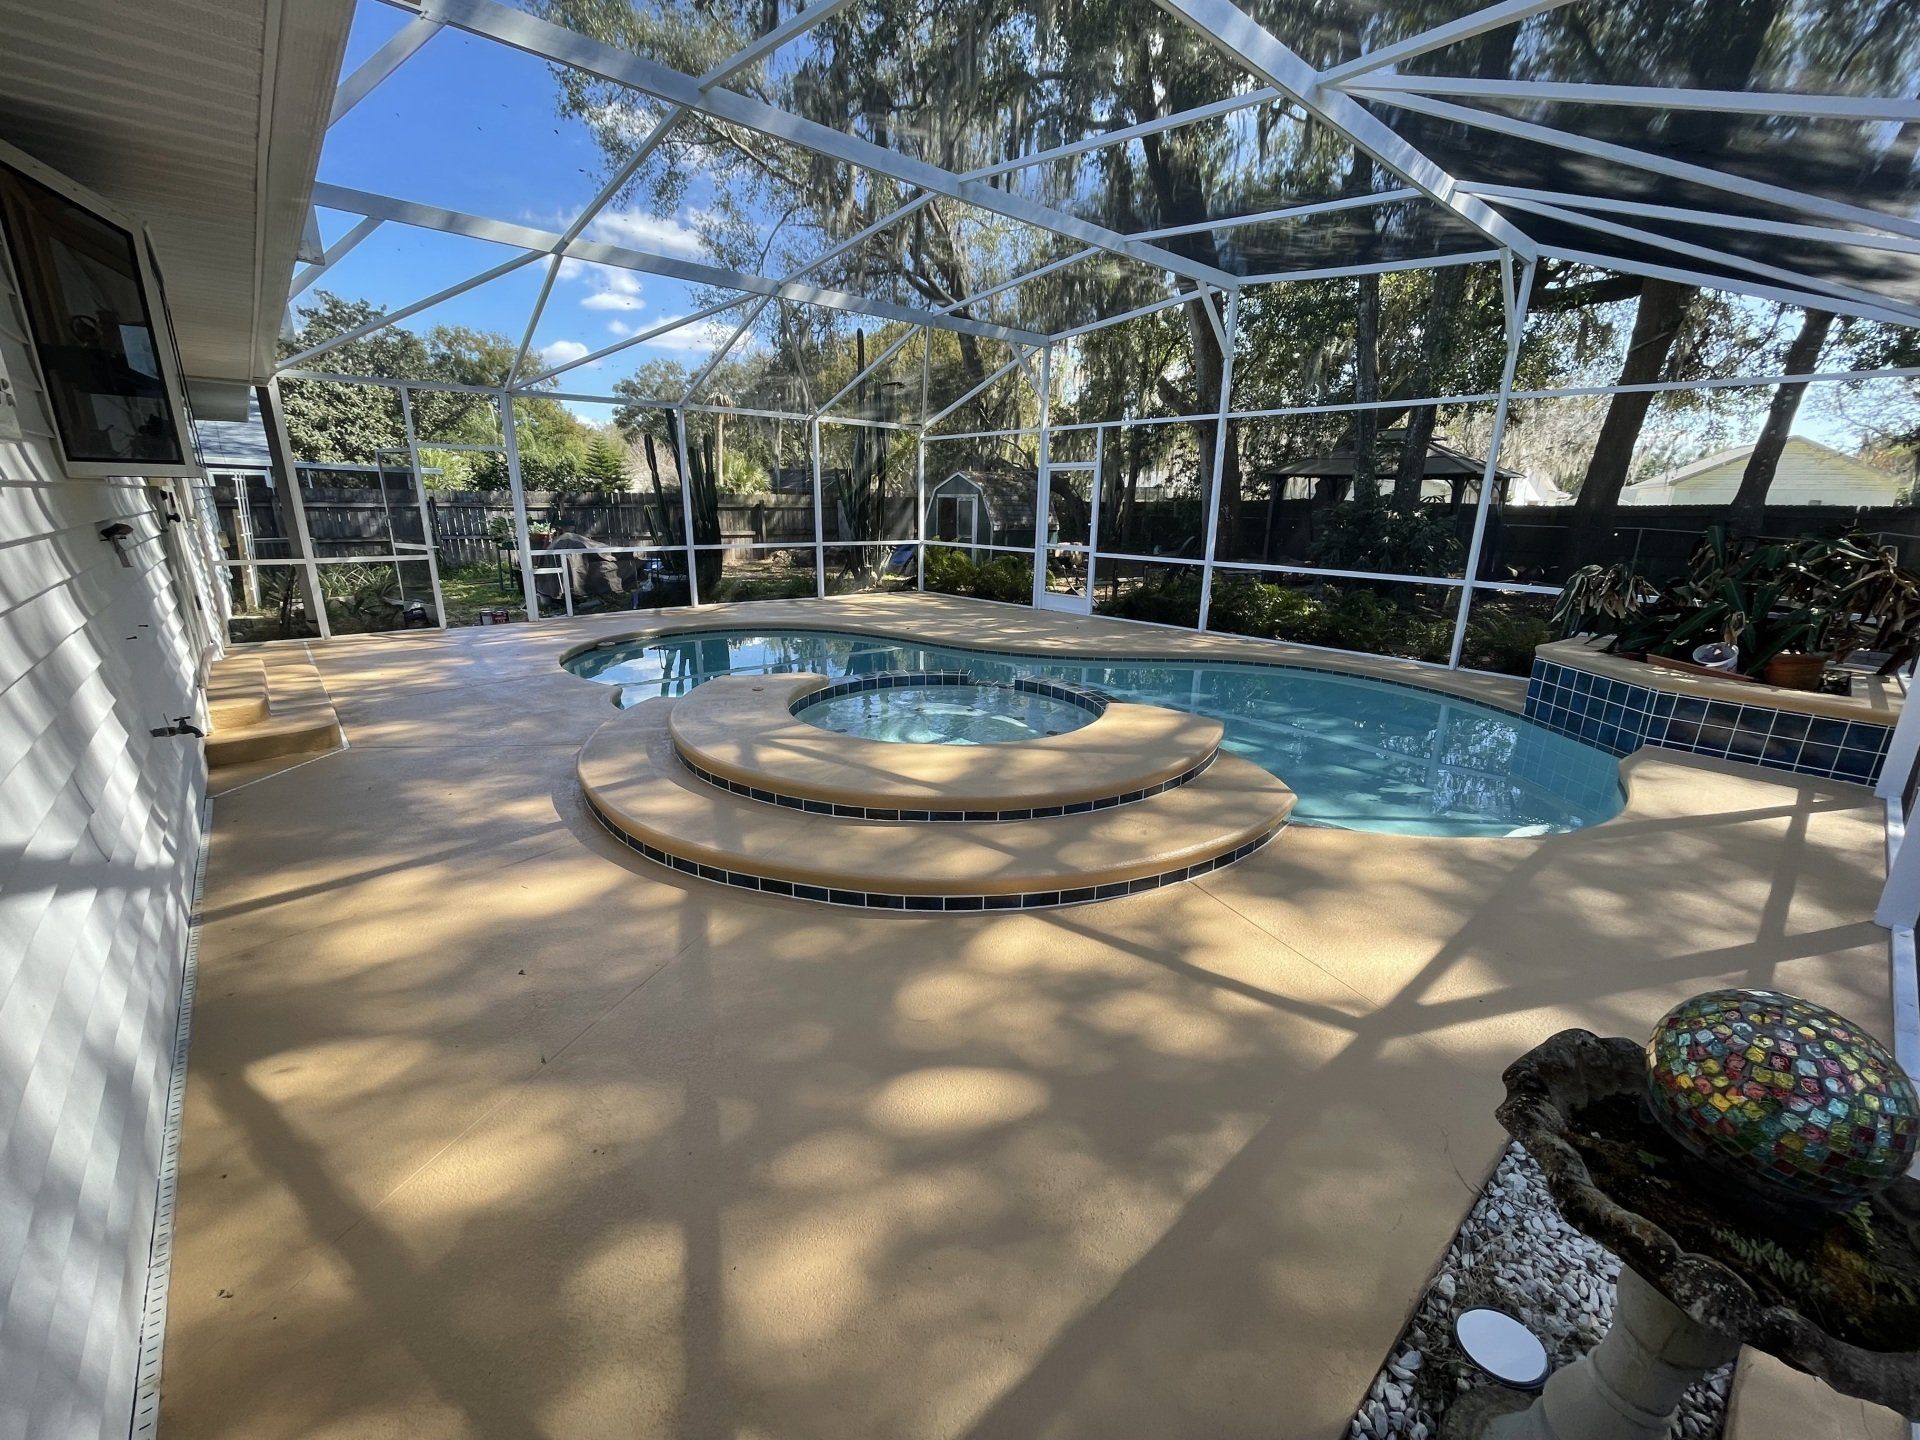 Expert pressure washing for patio and pool deck cleaning in Altamonte Springs